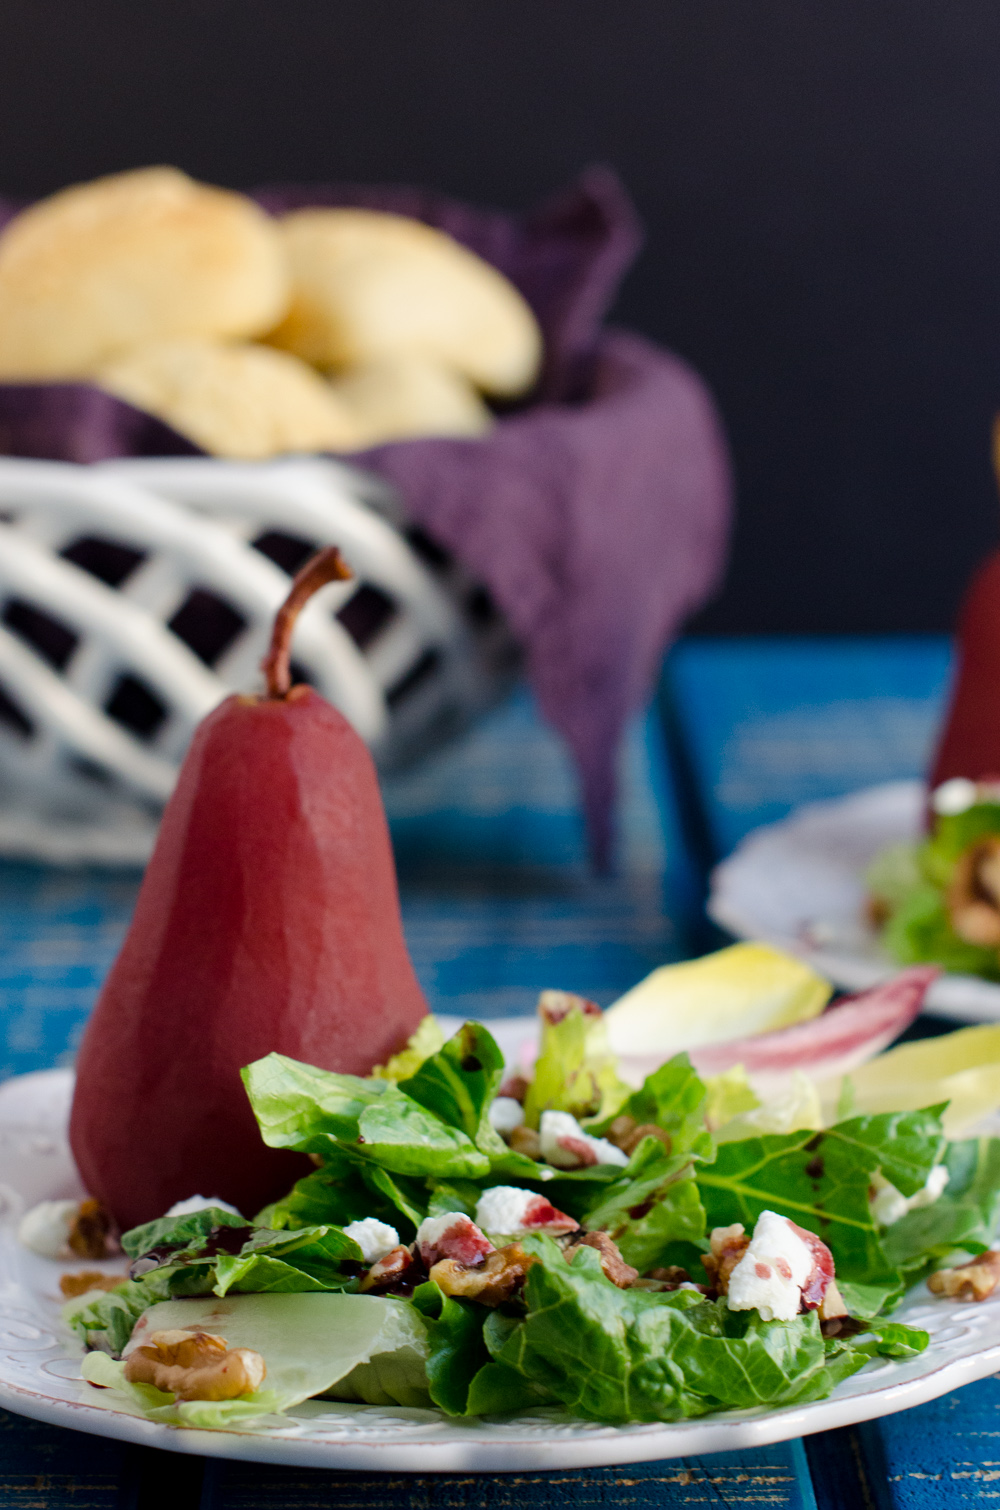 Poached Pear Salad recipe from ChefSarahElizabeth.com